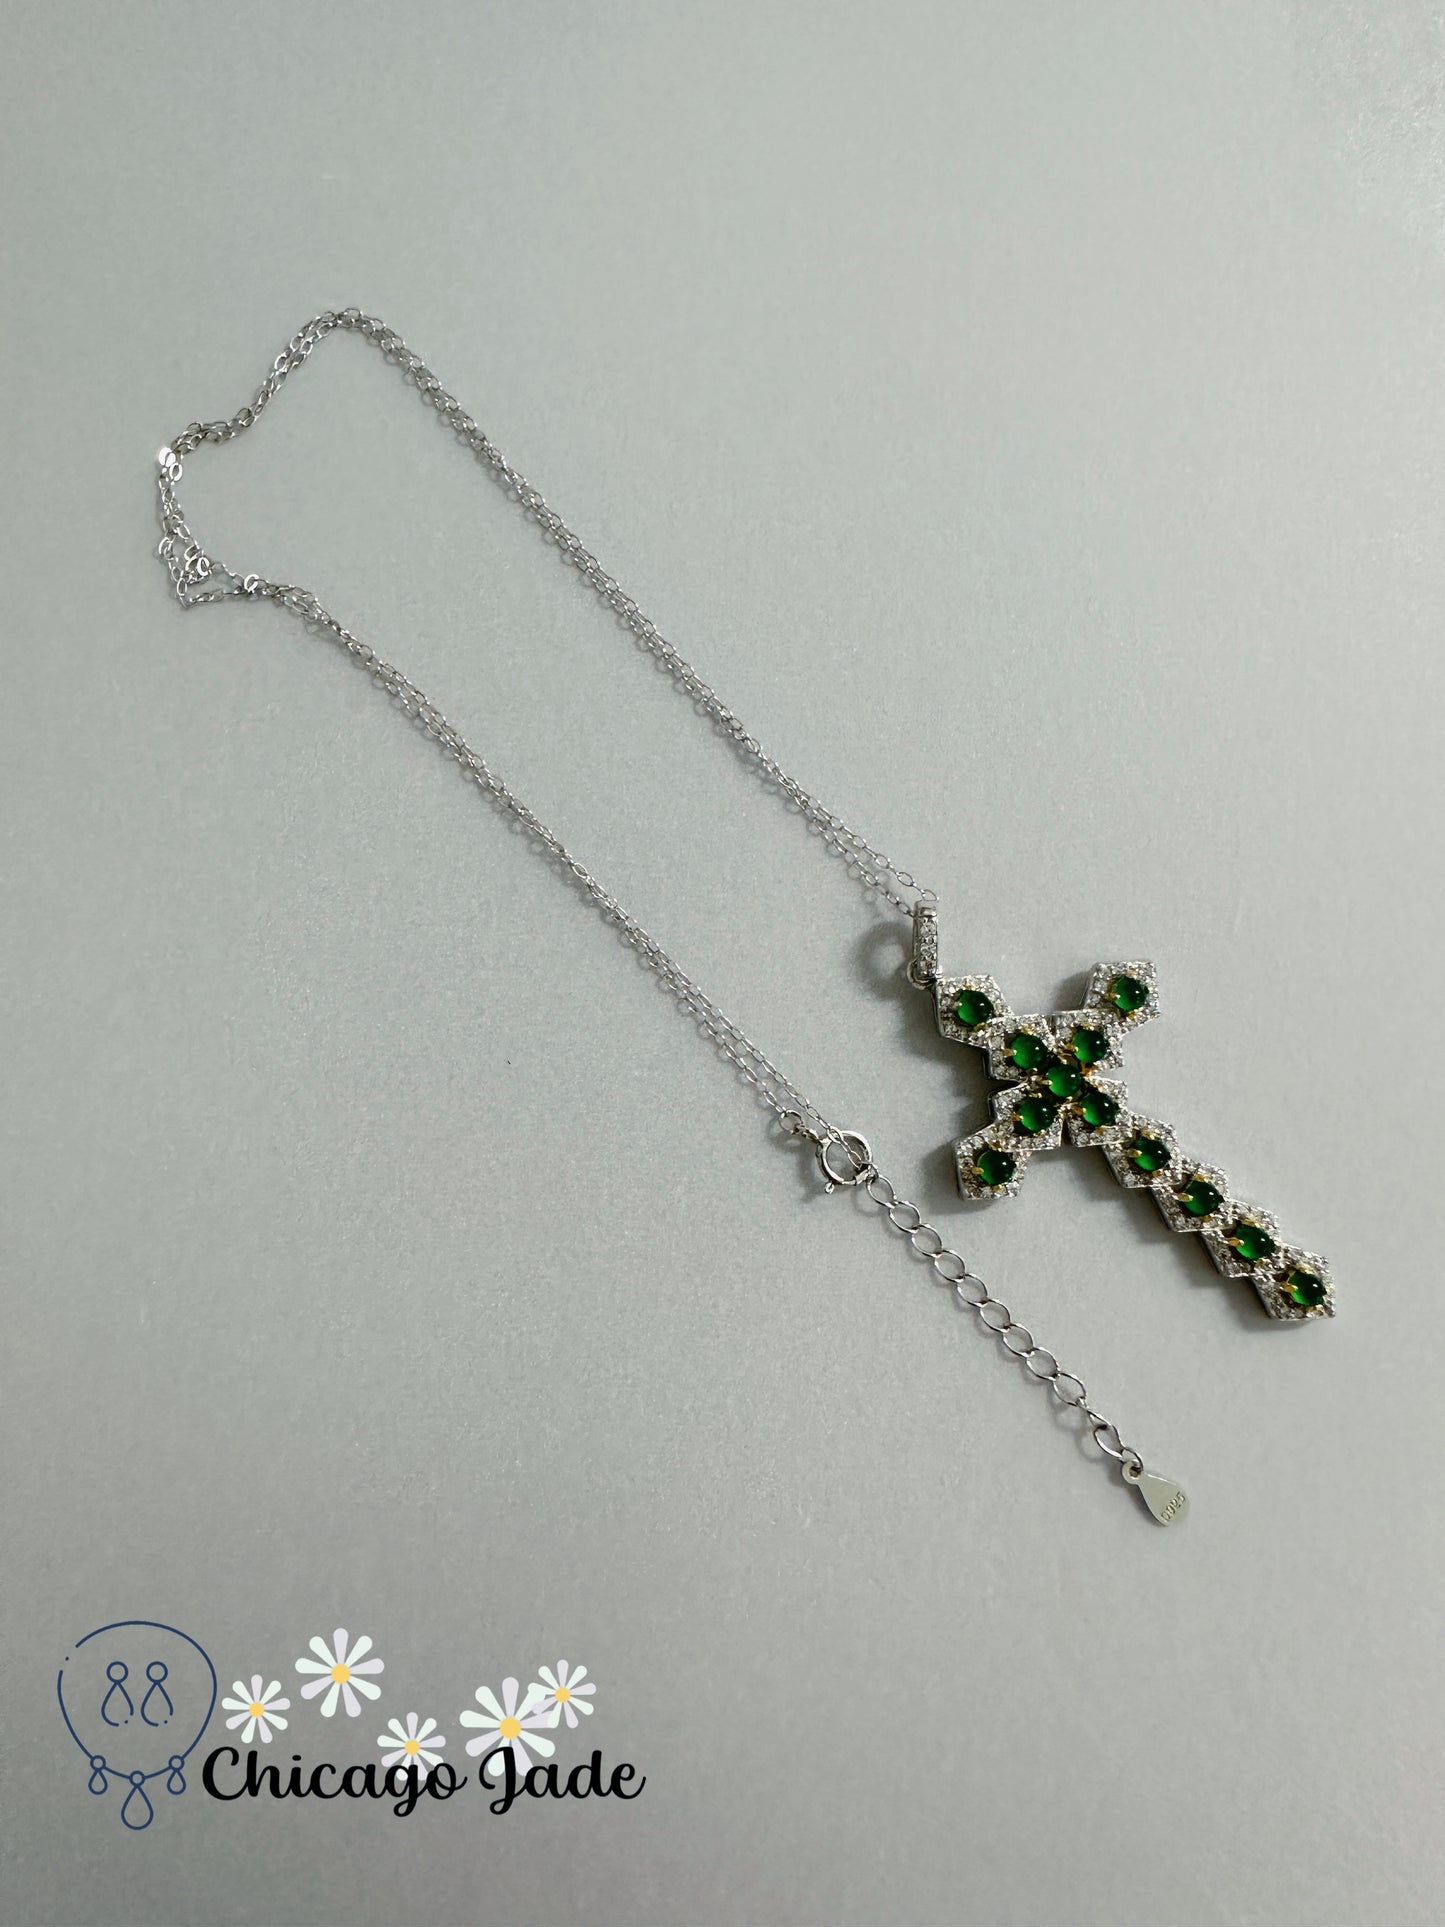 Green Crystal Cross Necklace with Jade Stone Pendant and Sterling Silver Chain, Handmade Elegant Gift